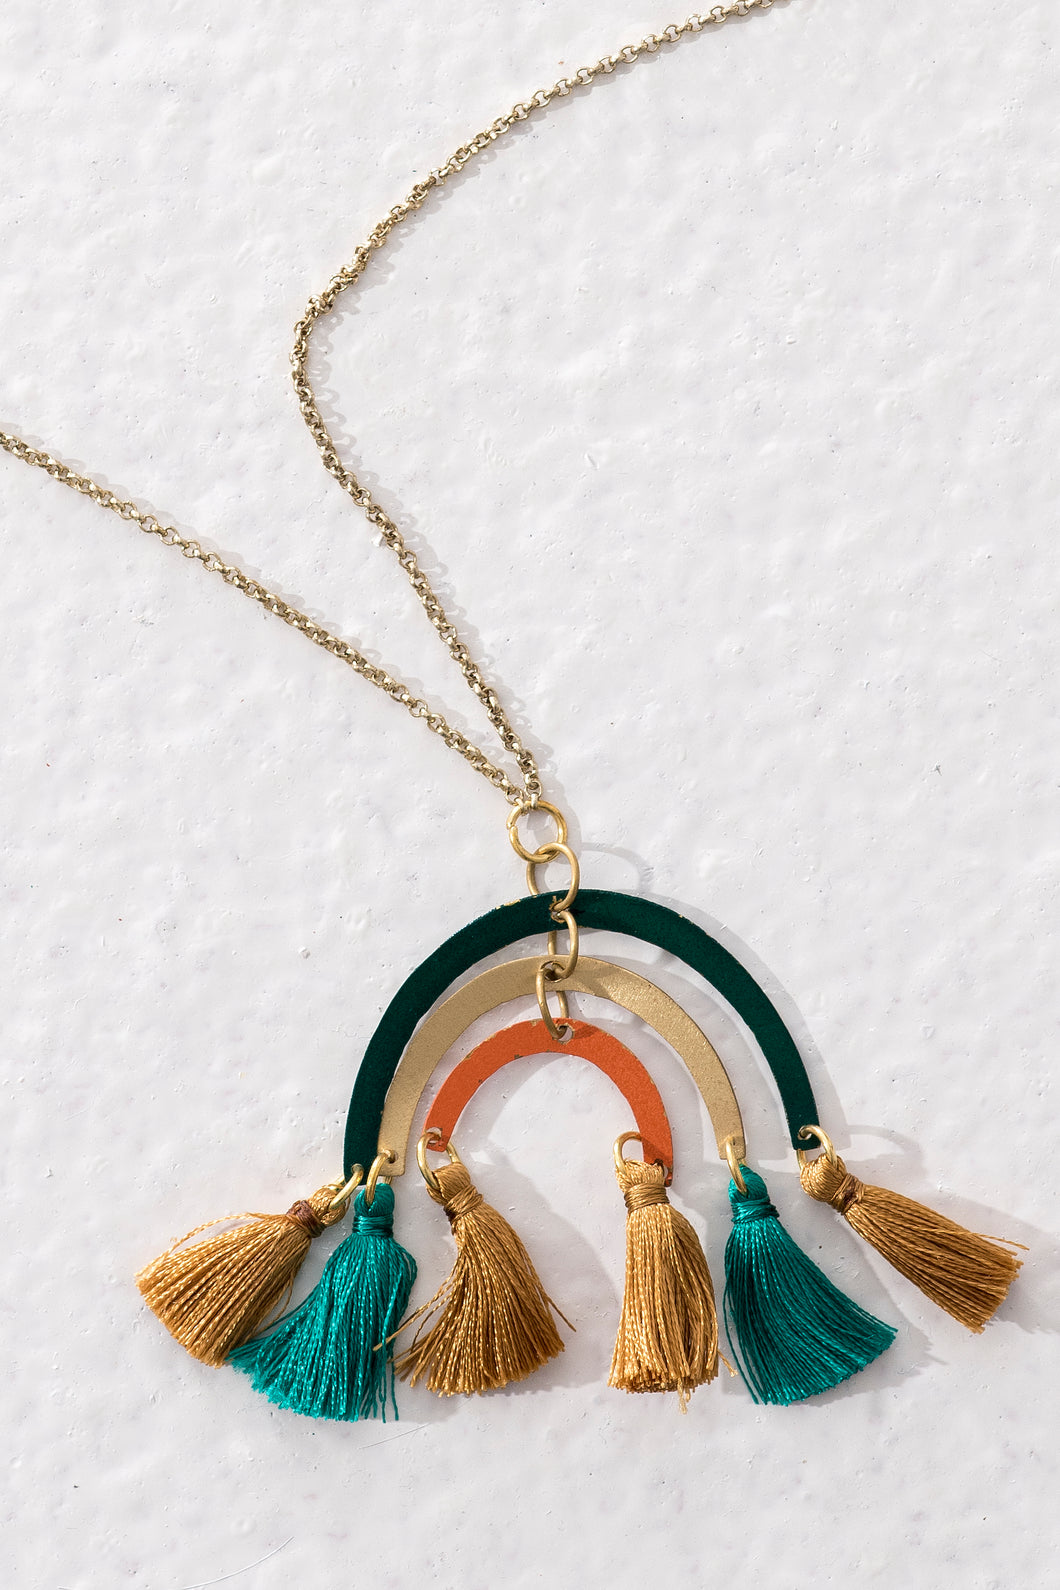 Ethical long necklace with brass rainbow-like pendant and multi-coloured tassels. Handmade in India.